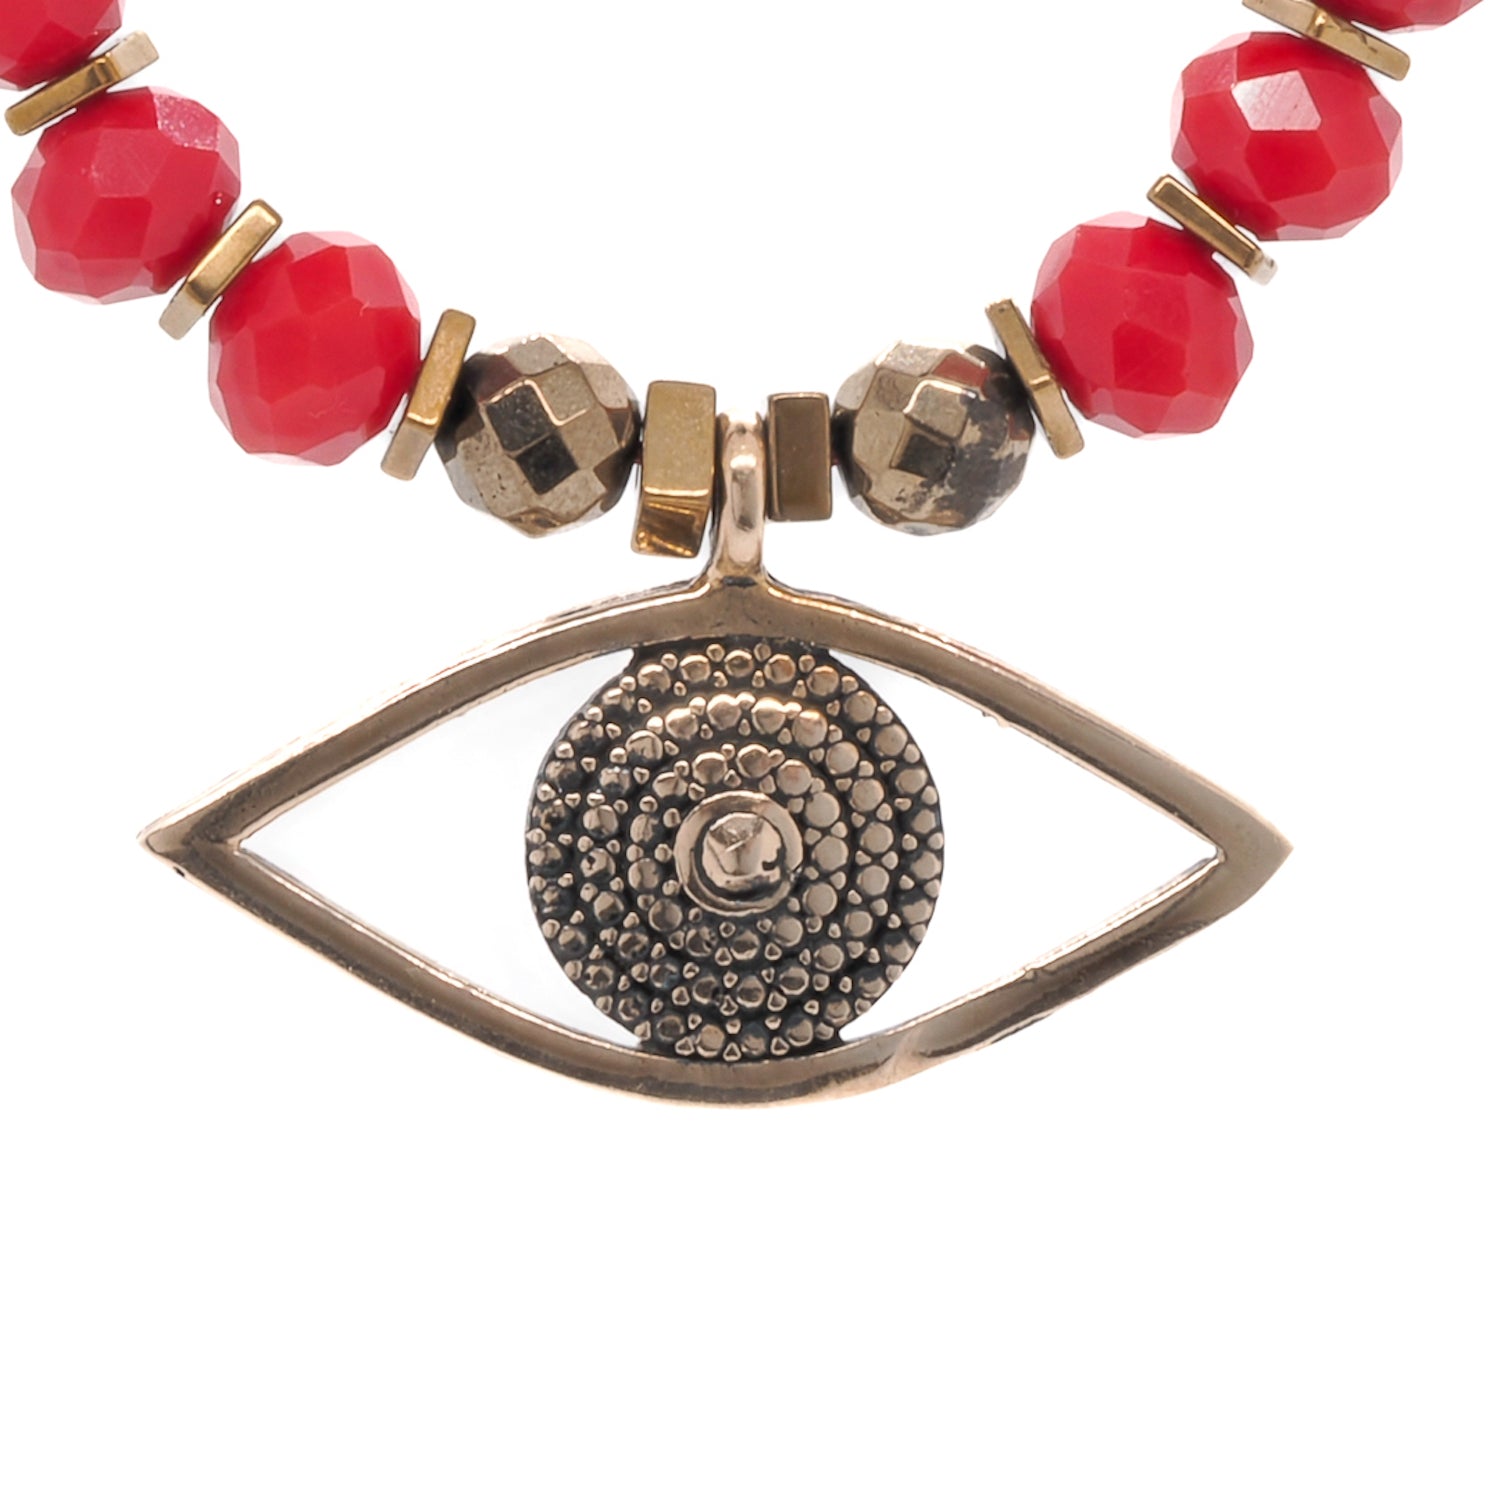 Christmas Evil Eye Necklace with vibrant red crystal beads and a handmade bronze Evil Eye pendant.